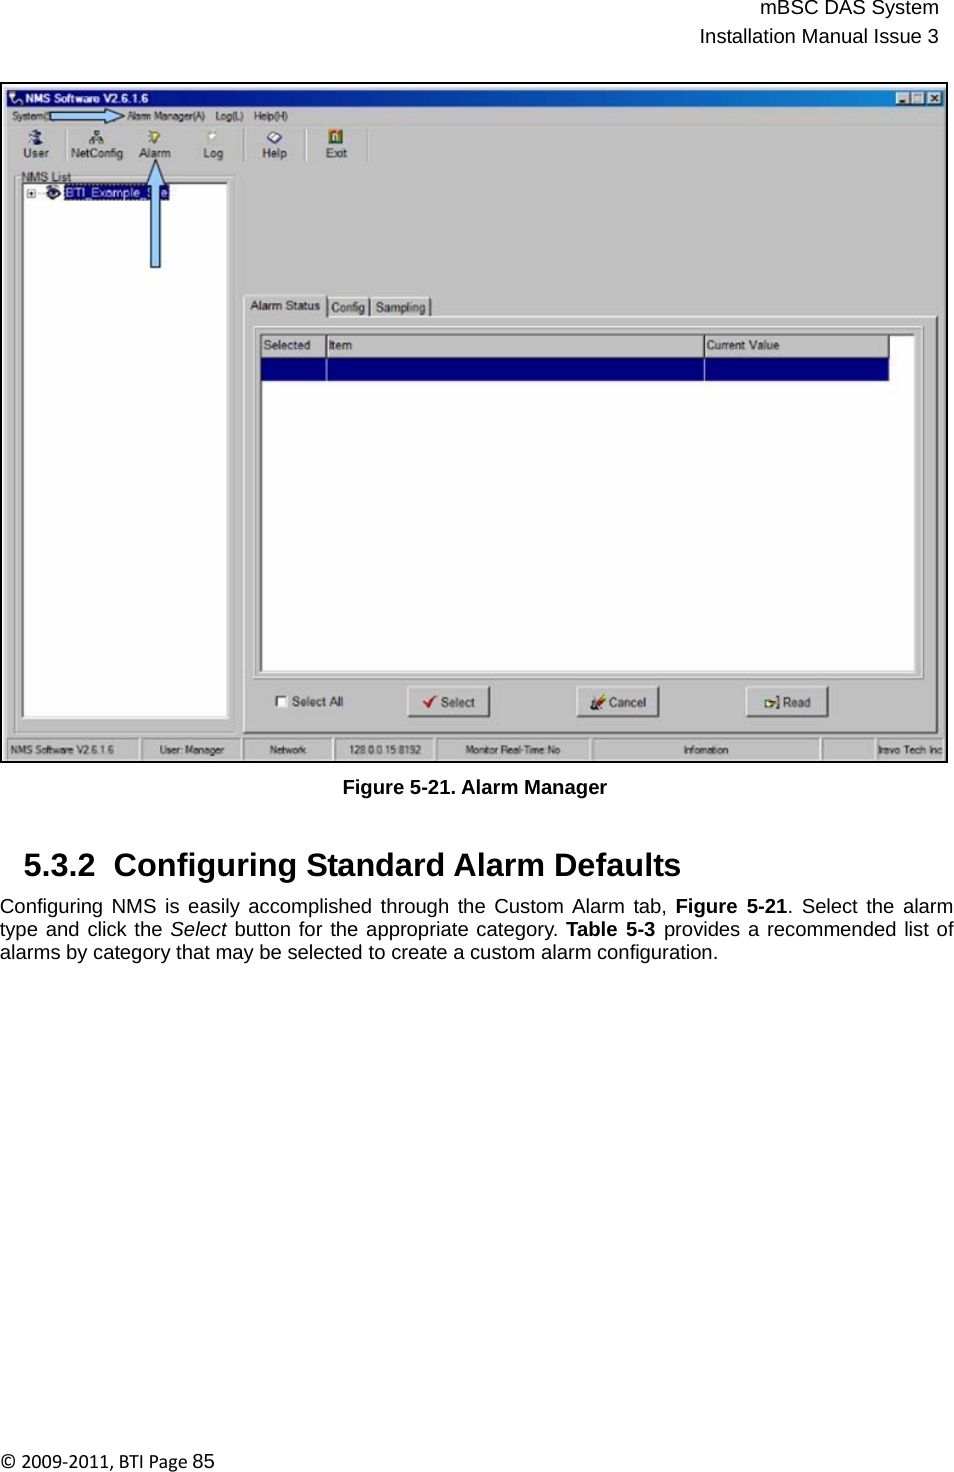 mBSC DAS SystemInstallation Manual Issue 3©2009‐2011,BTIPage85                                     Figure 5-21. Alarm Manager   5.3.2  Configuring Standard Alarm Defaults  Configuring NMS is easily accomplished through the Custom Alarm tab, Figure 5-21. Select the alarm type and click the Select button for the appropriate category. Table 5-3 provides a recommended list of alarms by category that may be selected to create a custom alarm configuration. 